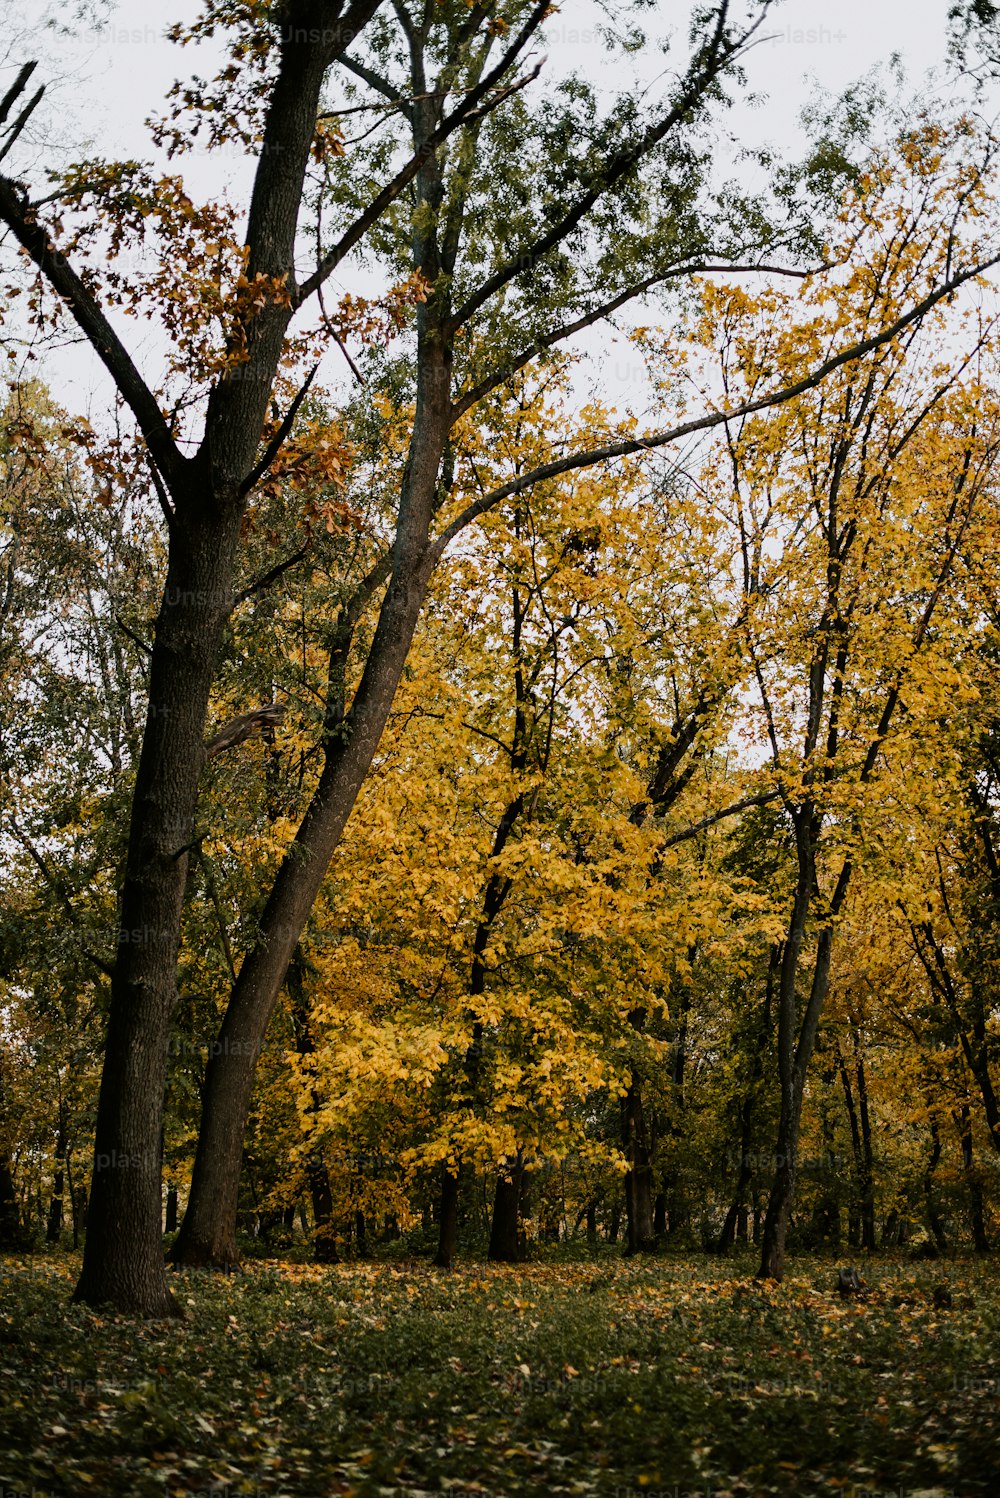 a group of trees with yellow leaves on the ground